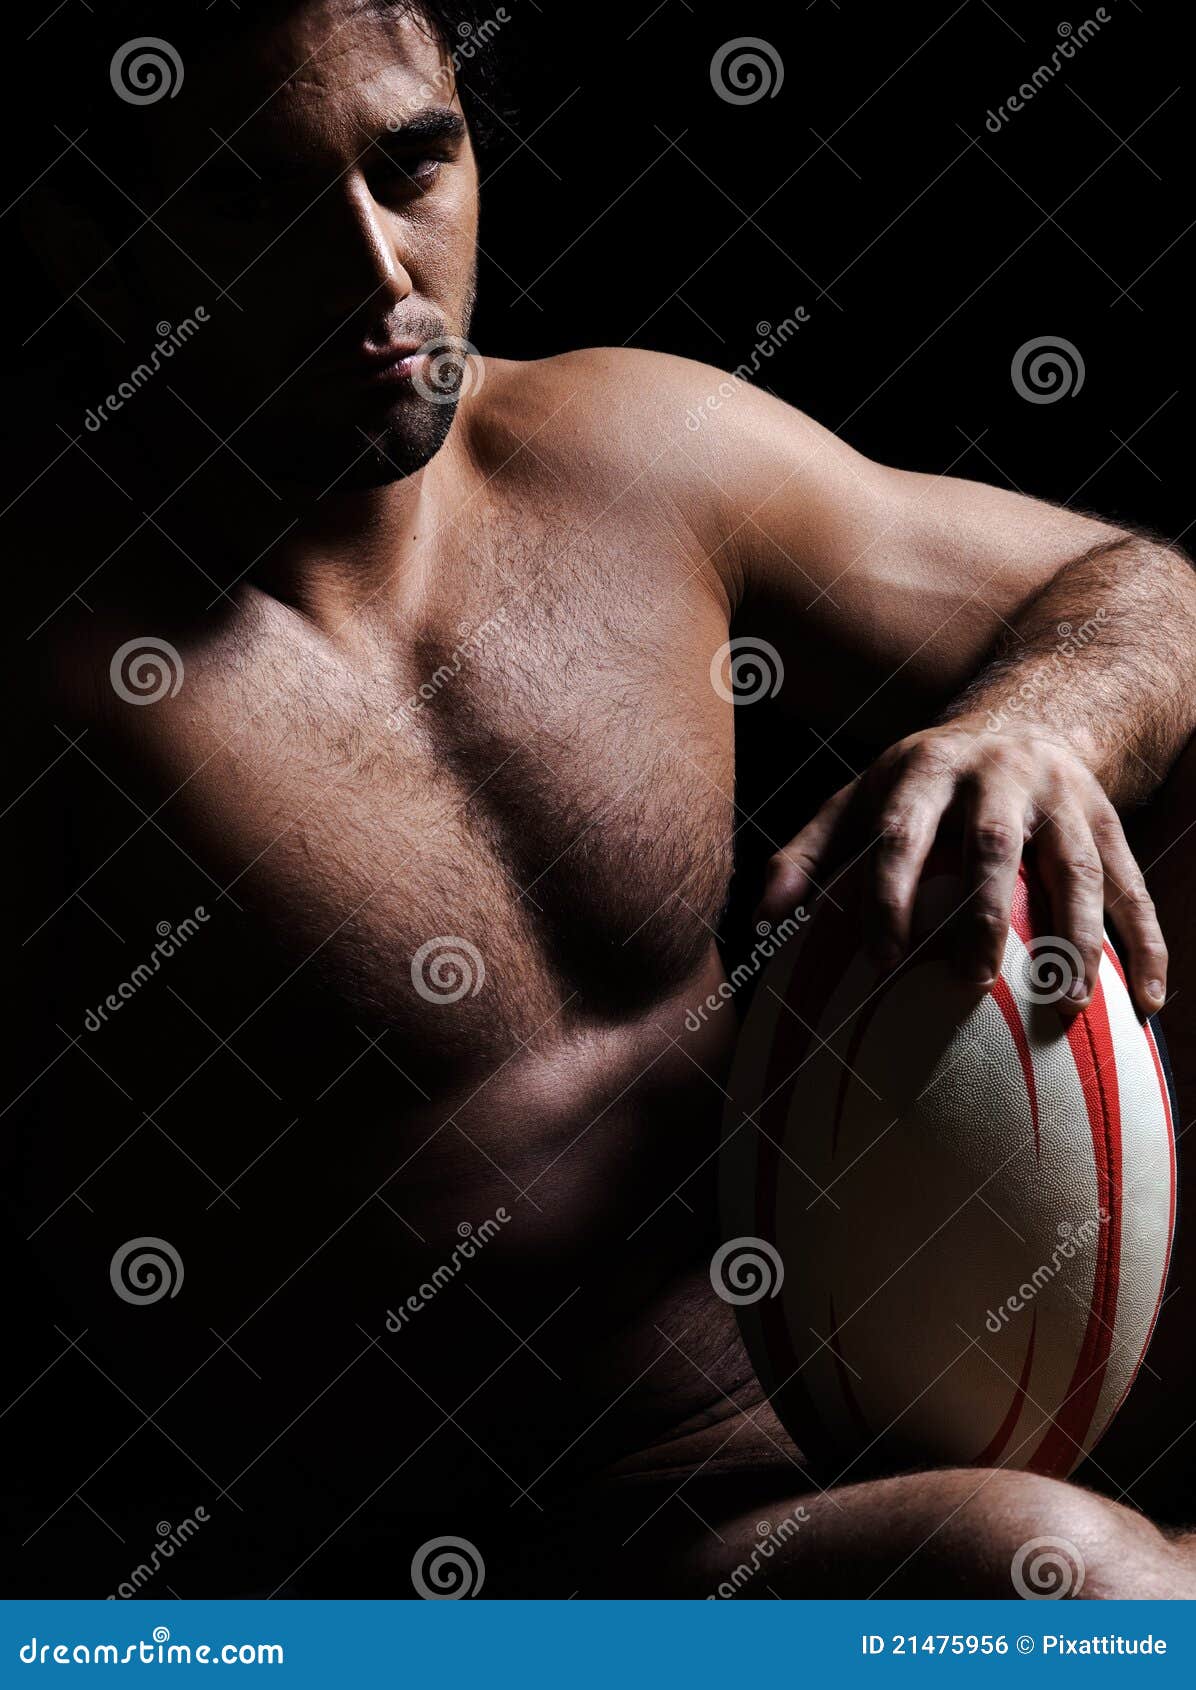 Topless Rugby